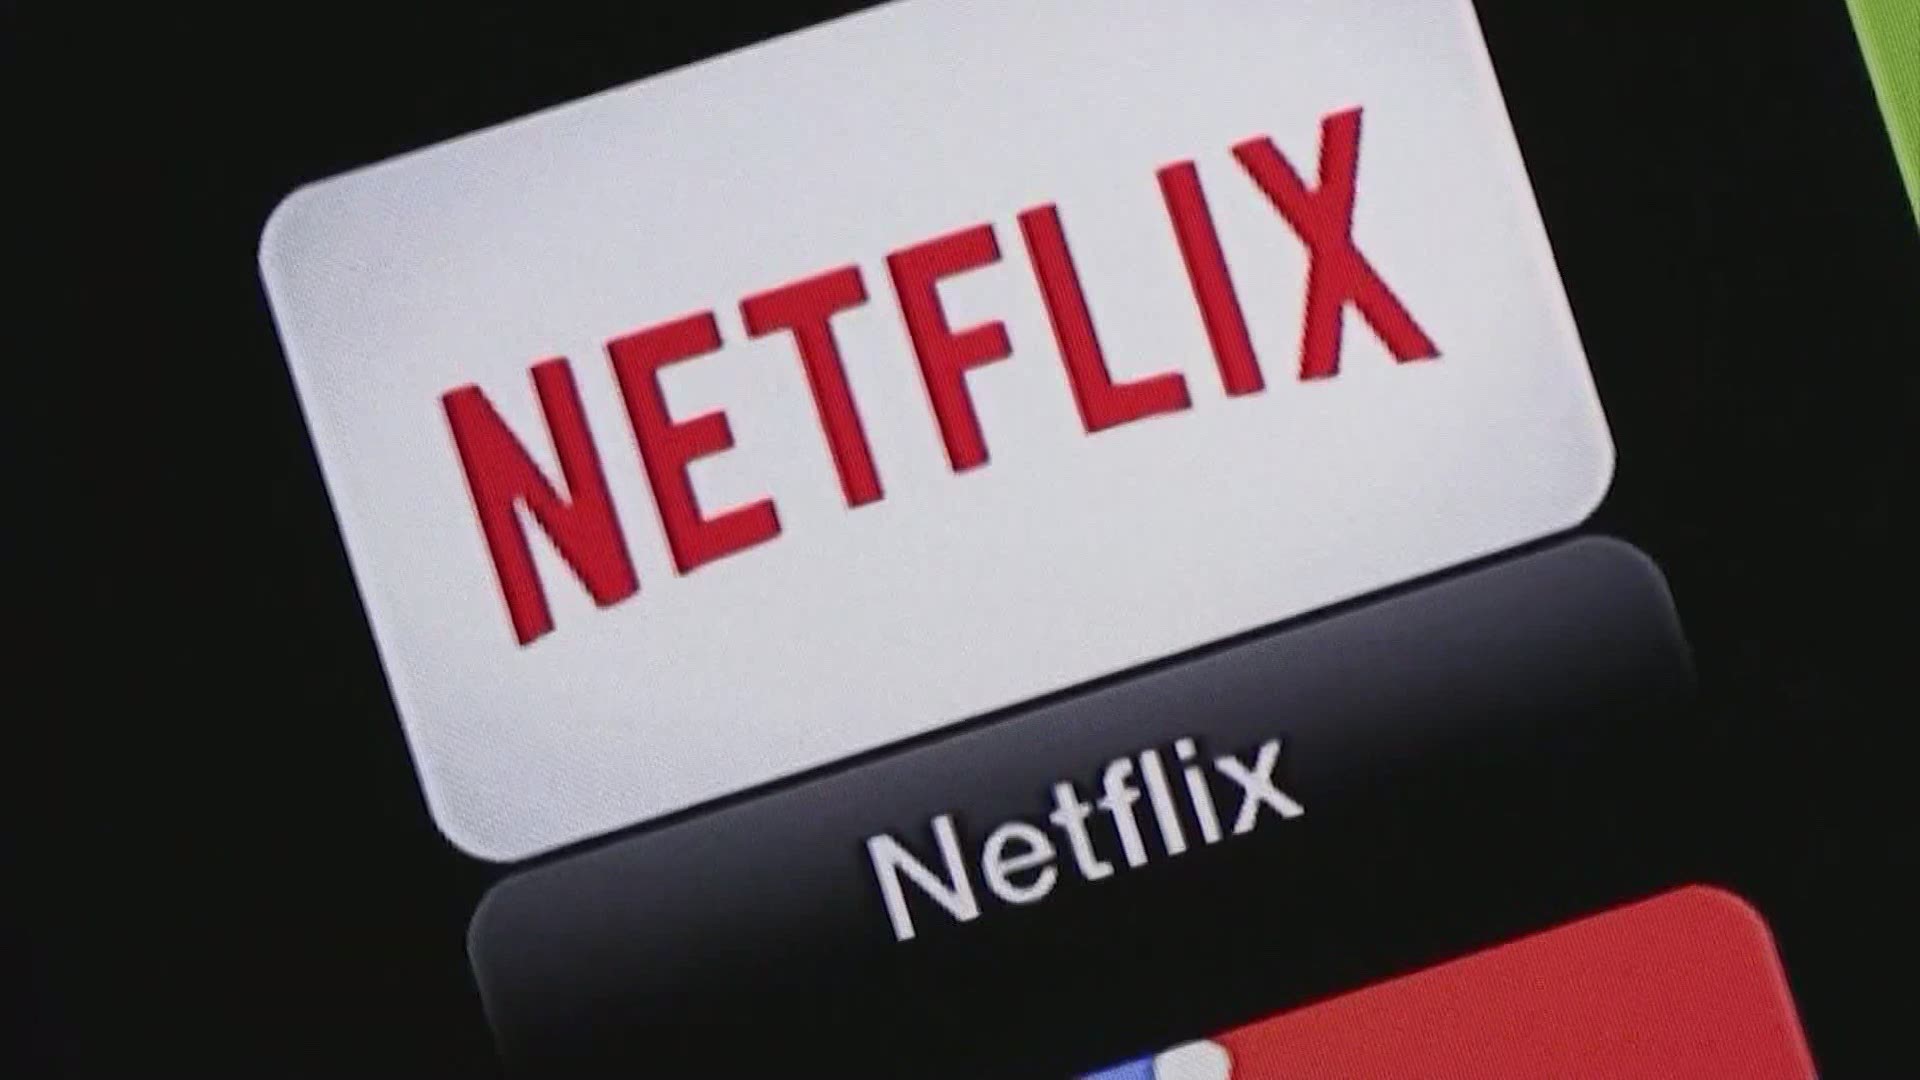 After years of resisting commercials, Netflix will introduce an ad-supported, lower-priced subscription tier soon.